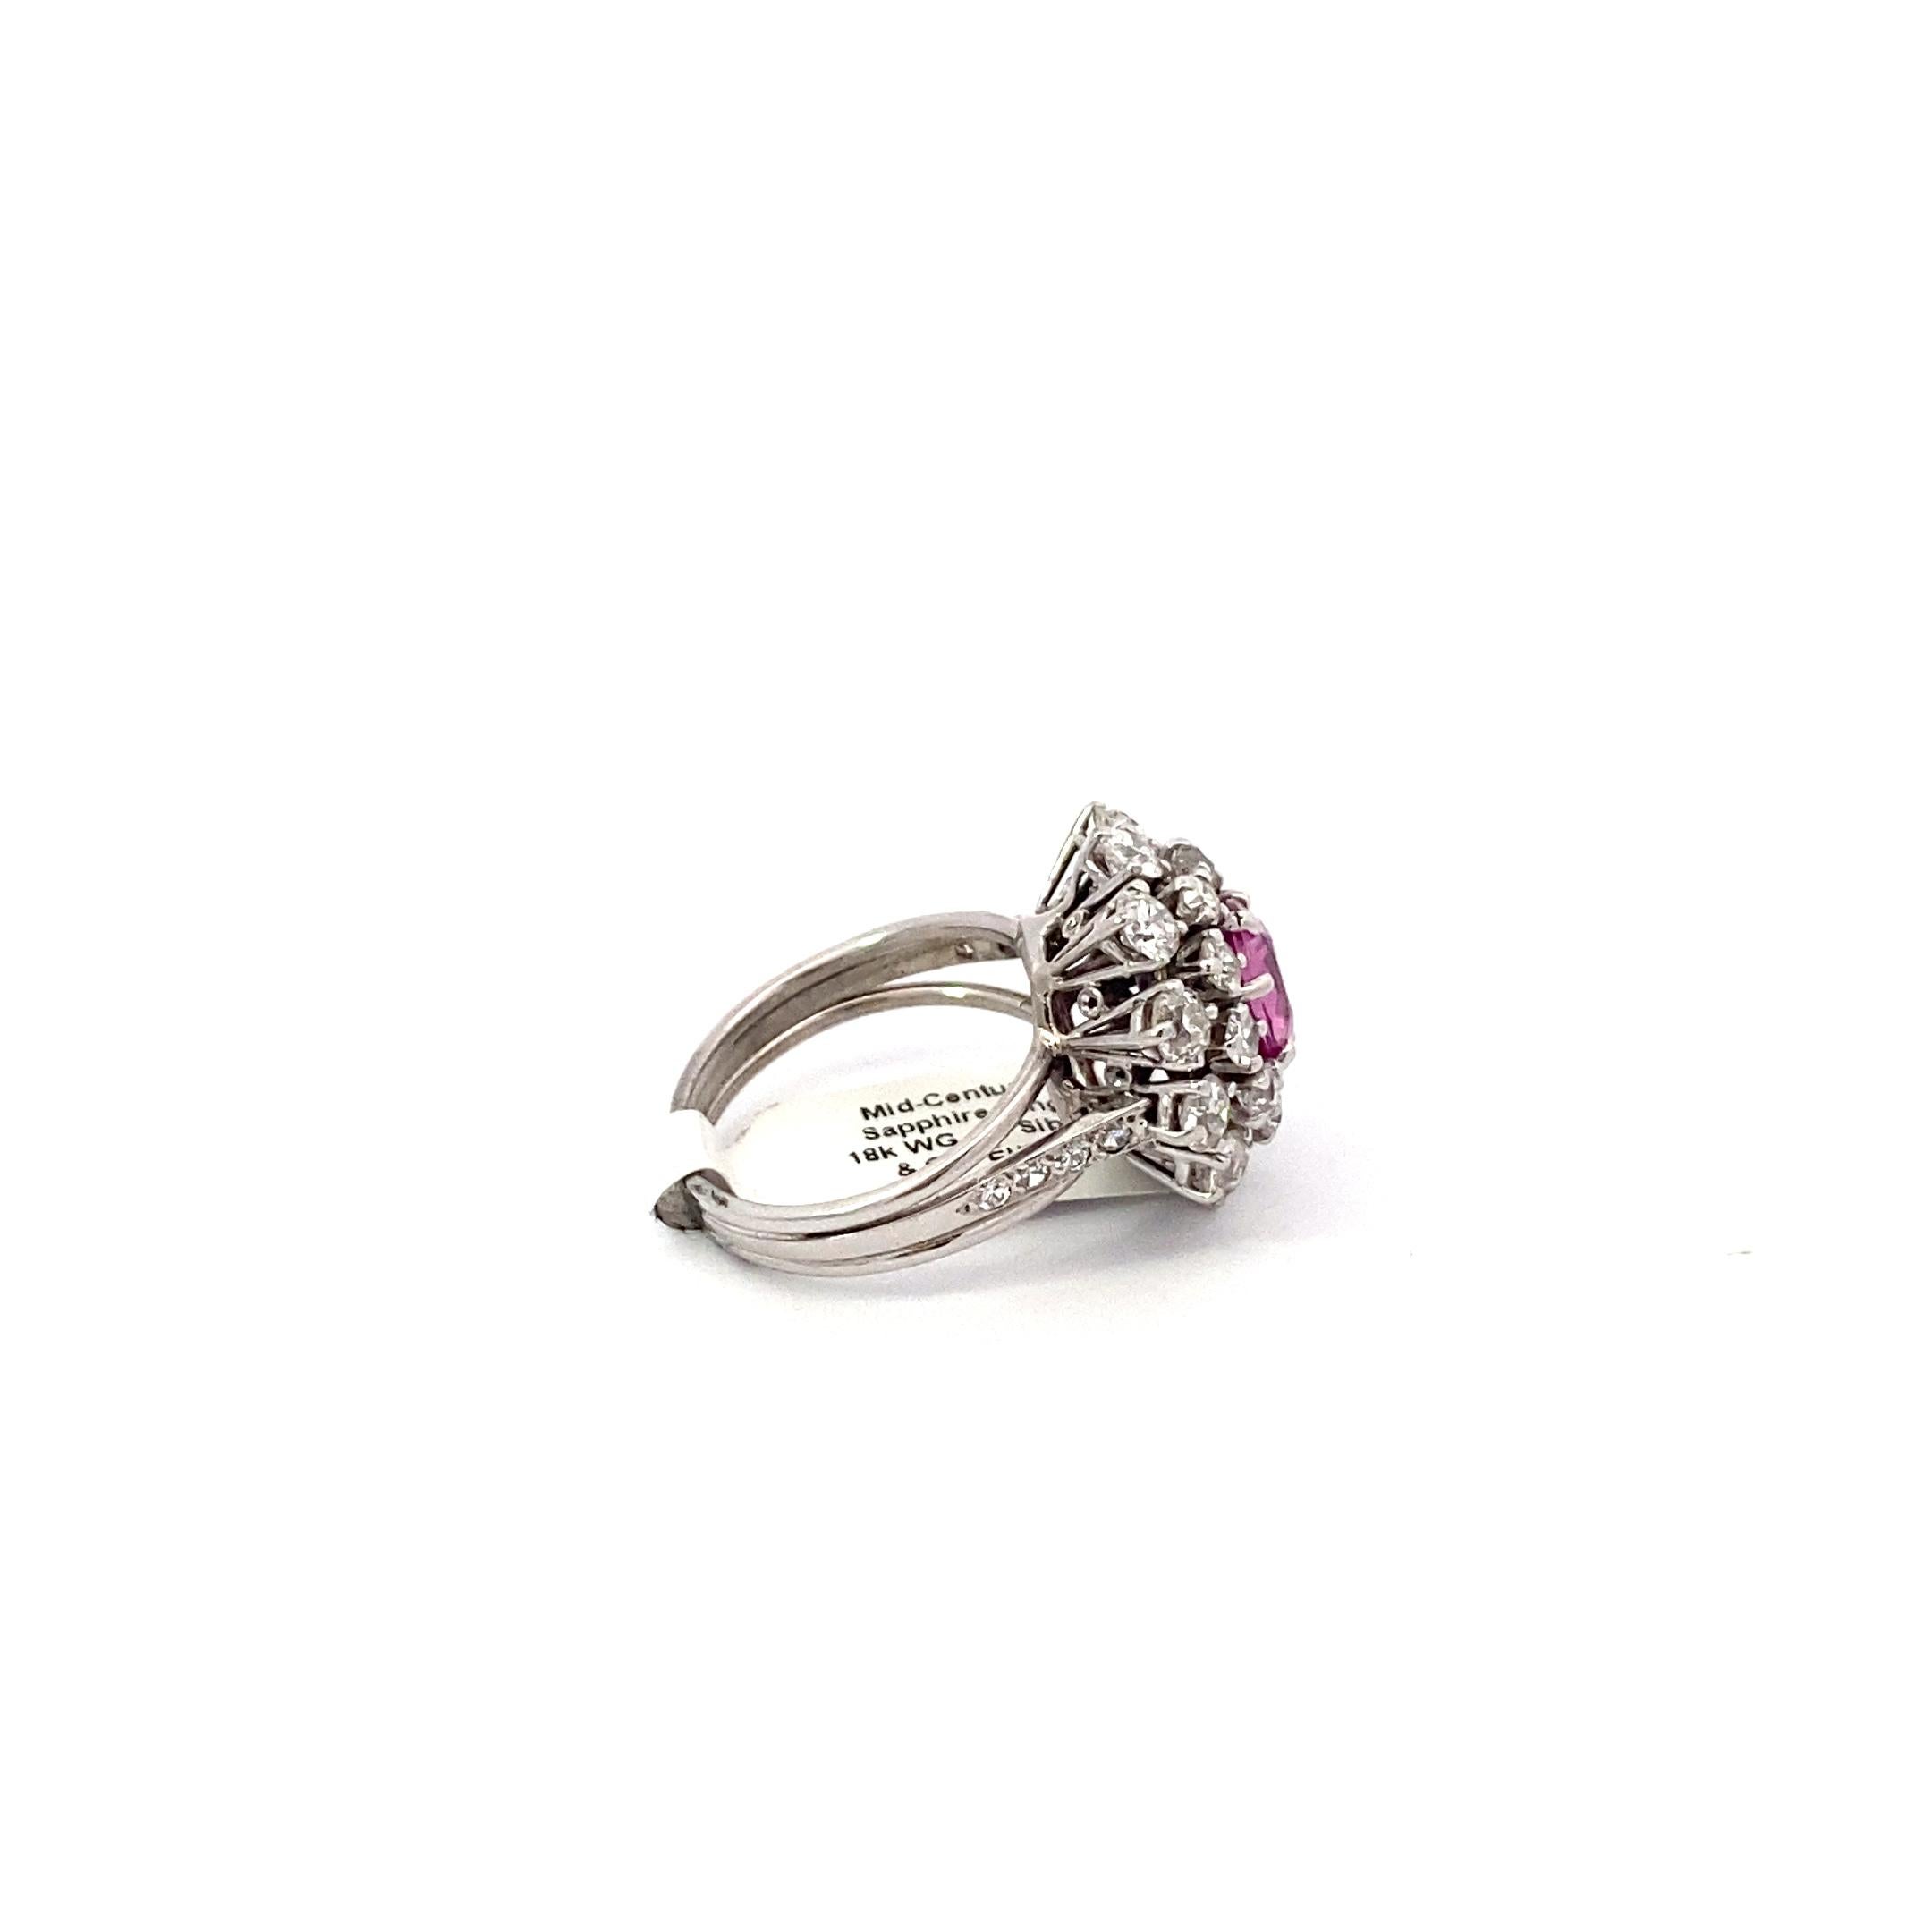 Women's or Men's 2.04ct Pink Sapphire Mid Century Ring with Old European Cut Diamond Halo For Sale